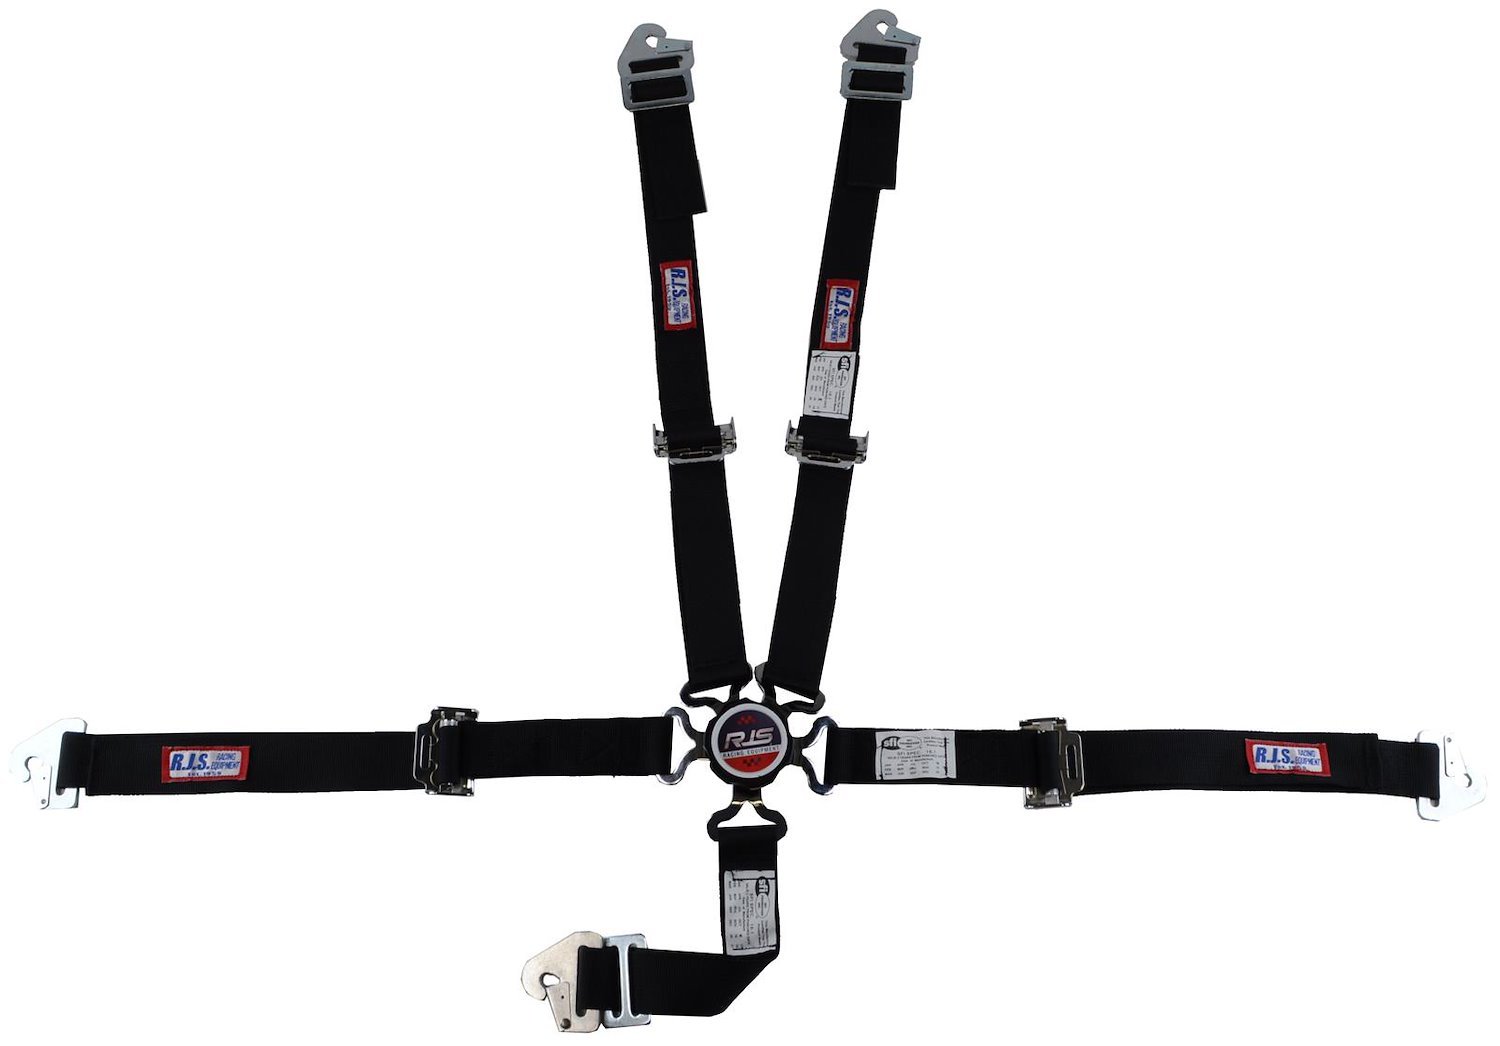 SFI 16.1 CAM-LOCK HARNESS 2 PULL UP Lap Belt 2 Shoulder Harness V ROLL BAR Mount 2 DOUBLE Sub ALL SNAP ENDS w/STERNUM STRAP GRAY